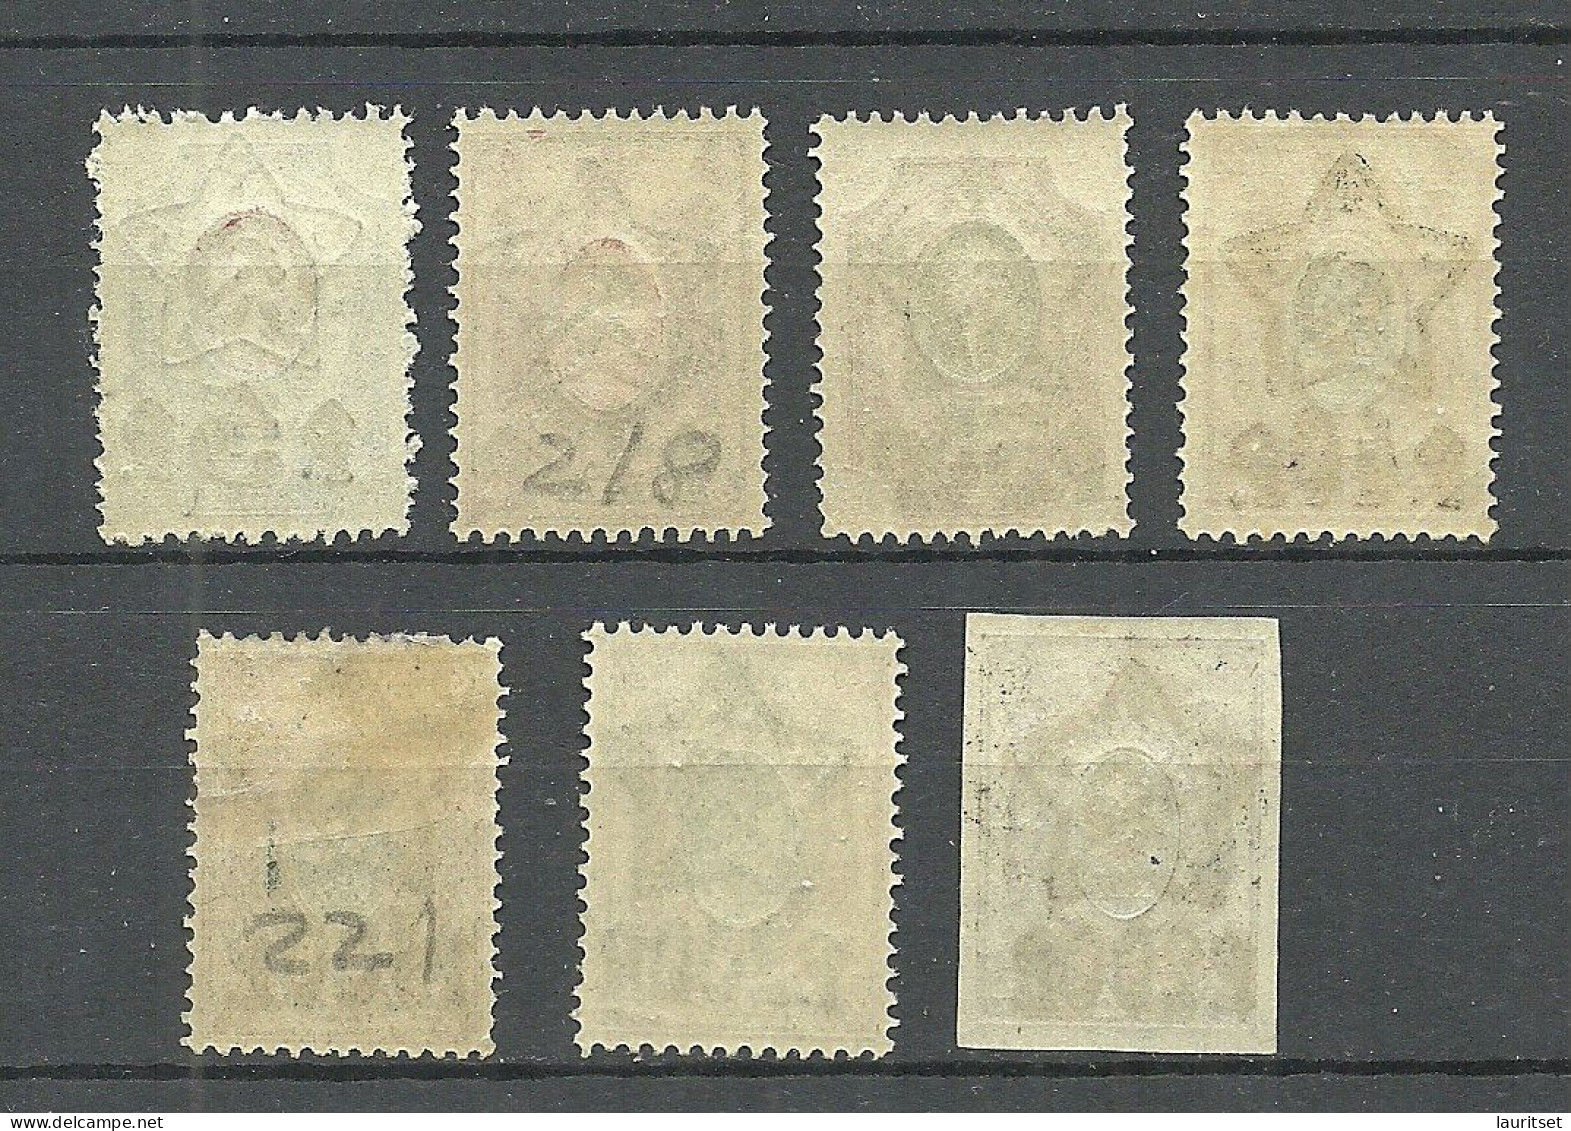 RUSSLAND RUSSIA 1922/1923 = Lot Of 7 Stamps From Set Michel 201 - 207 MNH/MH (100 P. OPT Is MH/*, All Others Are MNH) - Ongebruikt